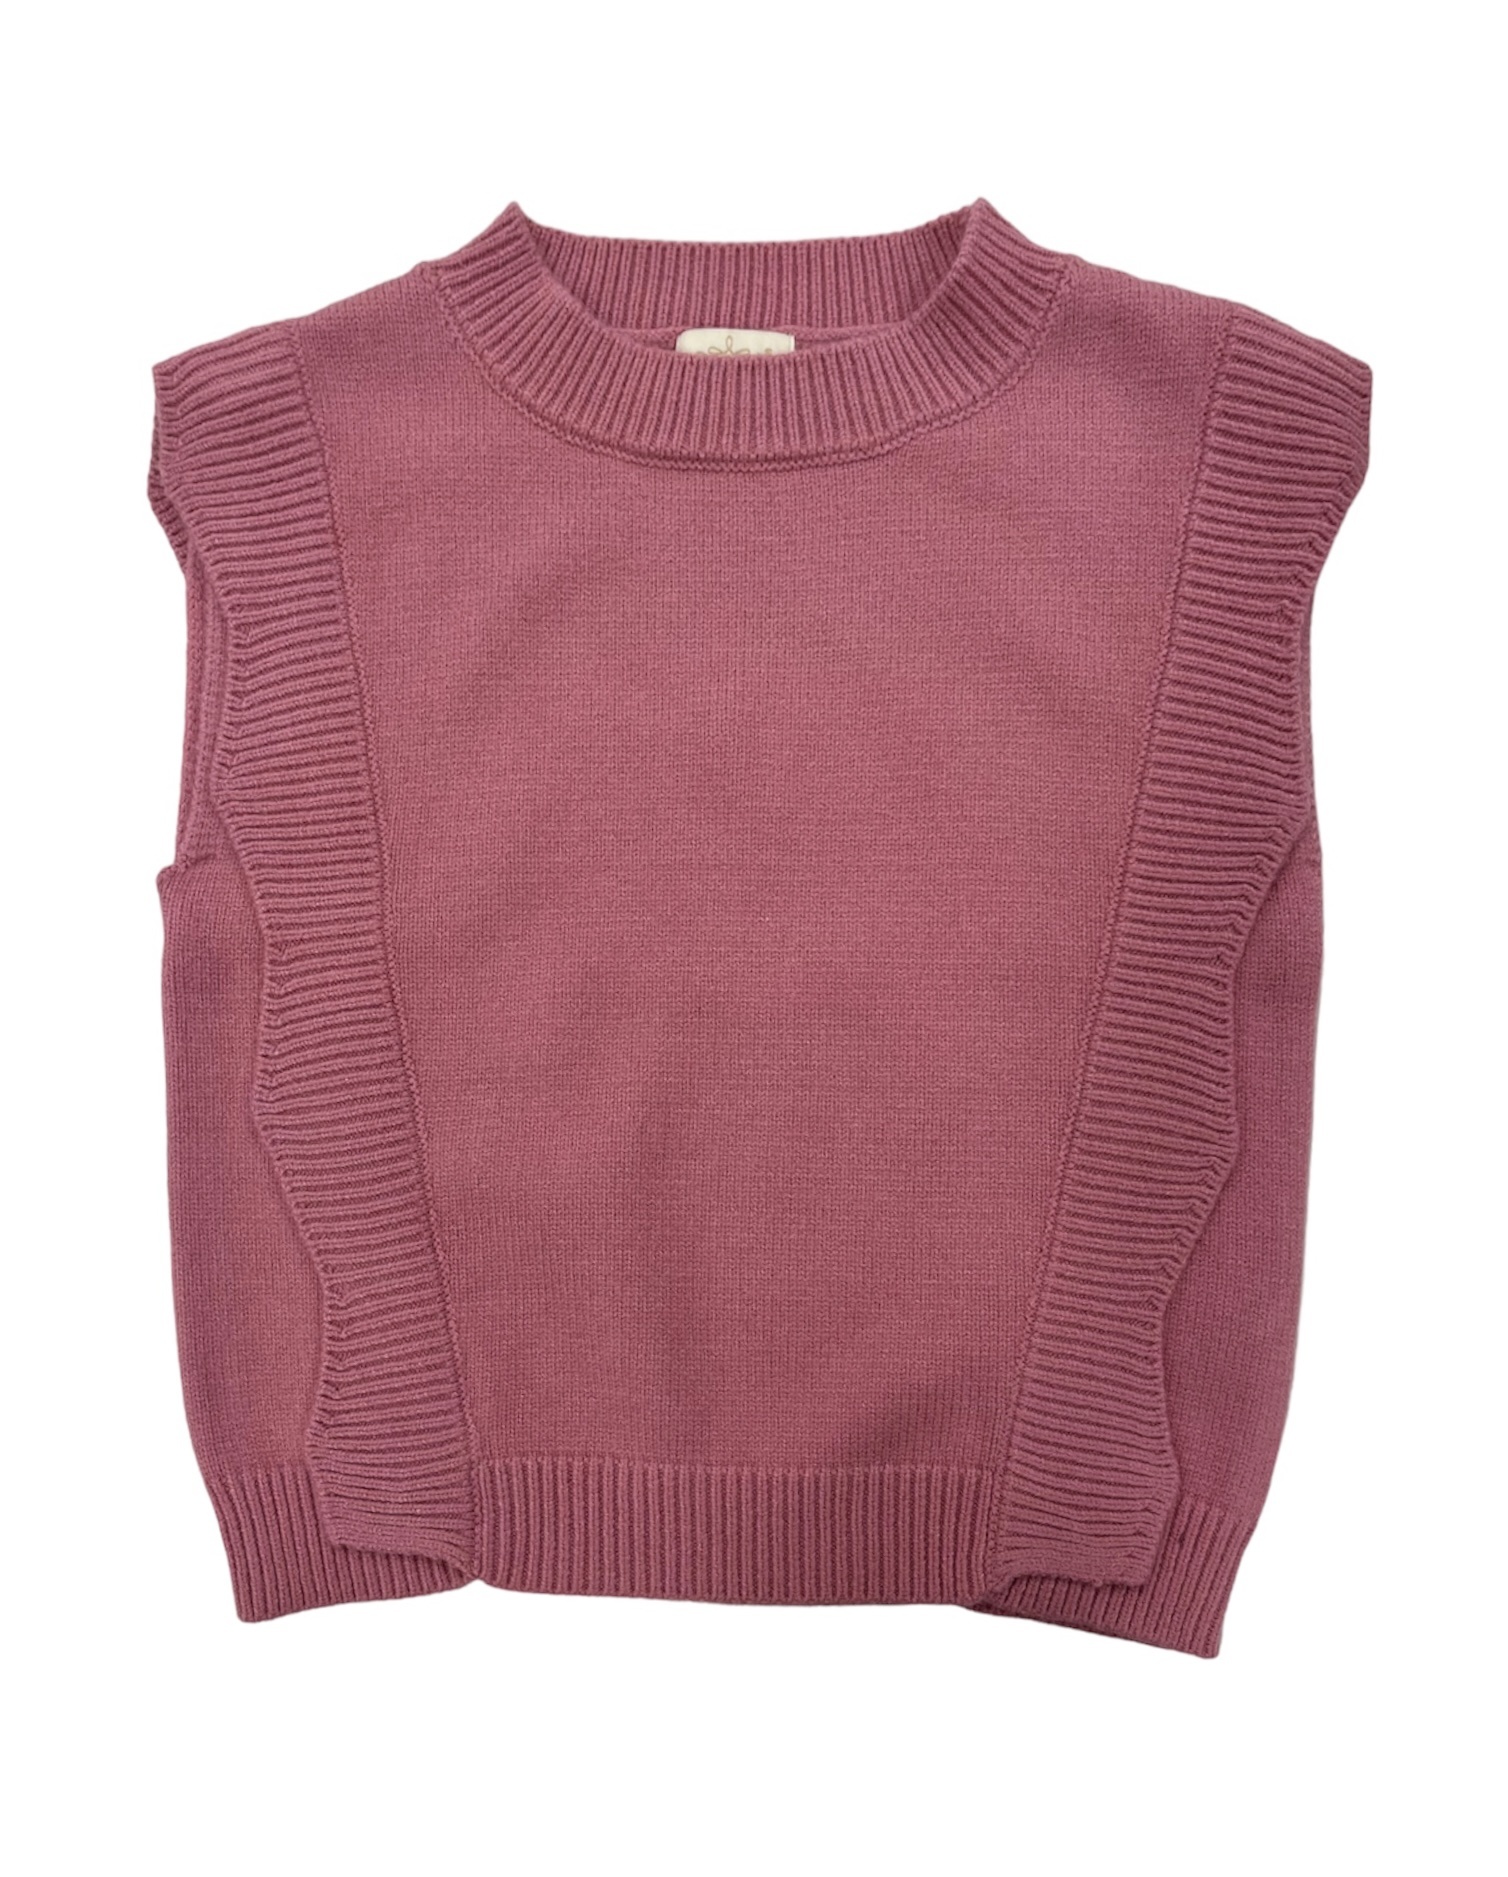 Creamie Cashmere Rose Slipover Knit Top